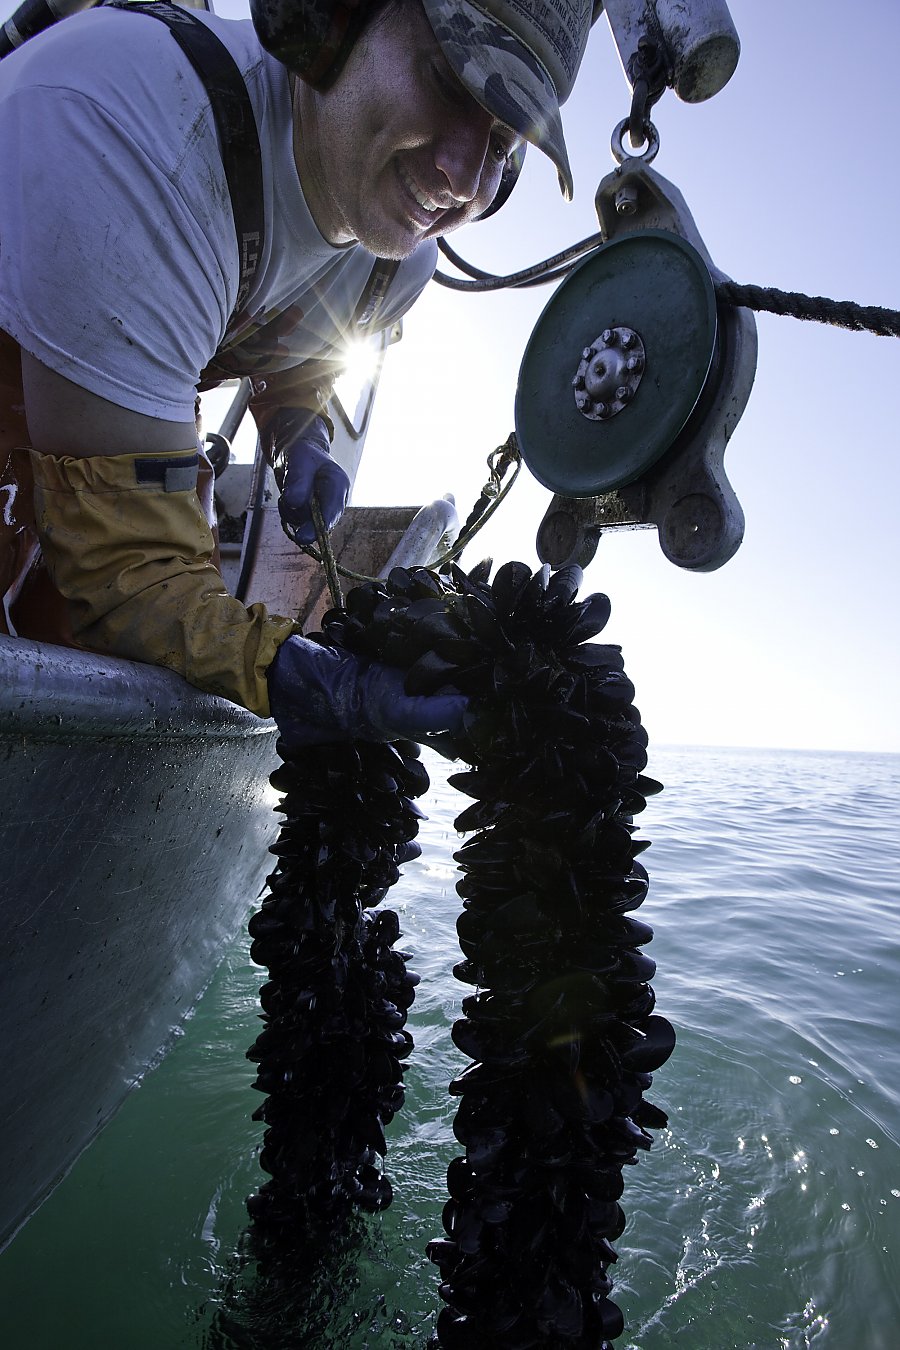 Fisherman with mussels on a longline